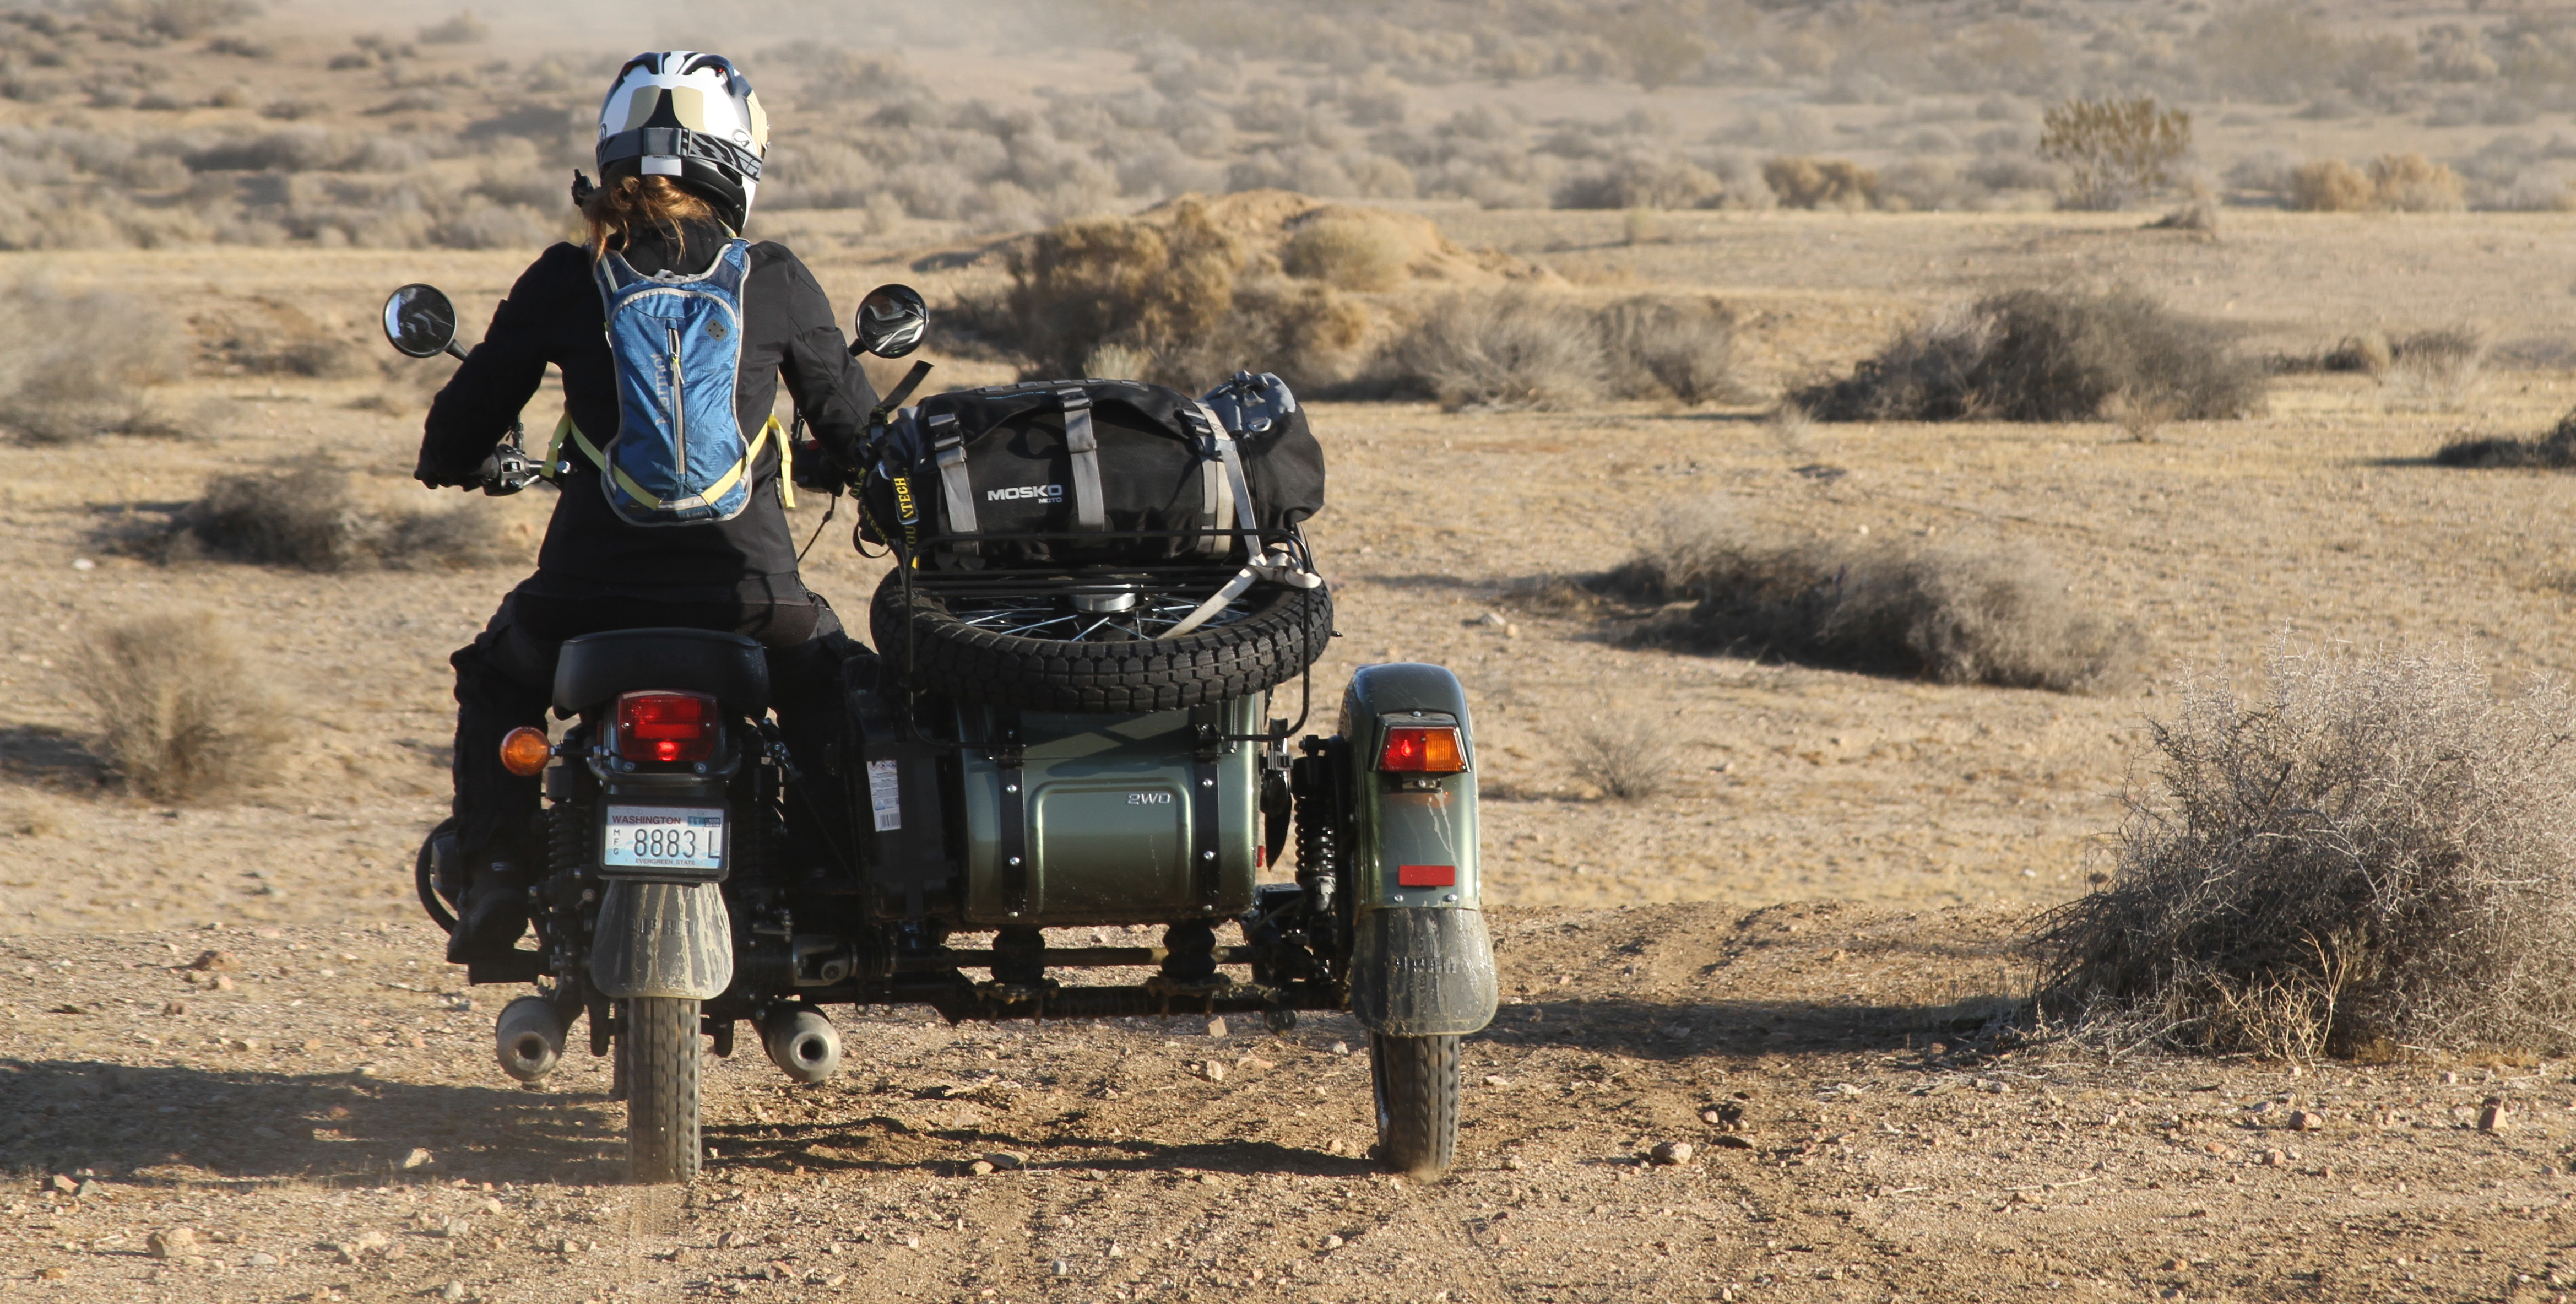 LA-Barstow-Vegas on a Ural Gear-Up sidecar.